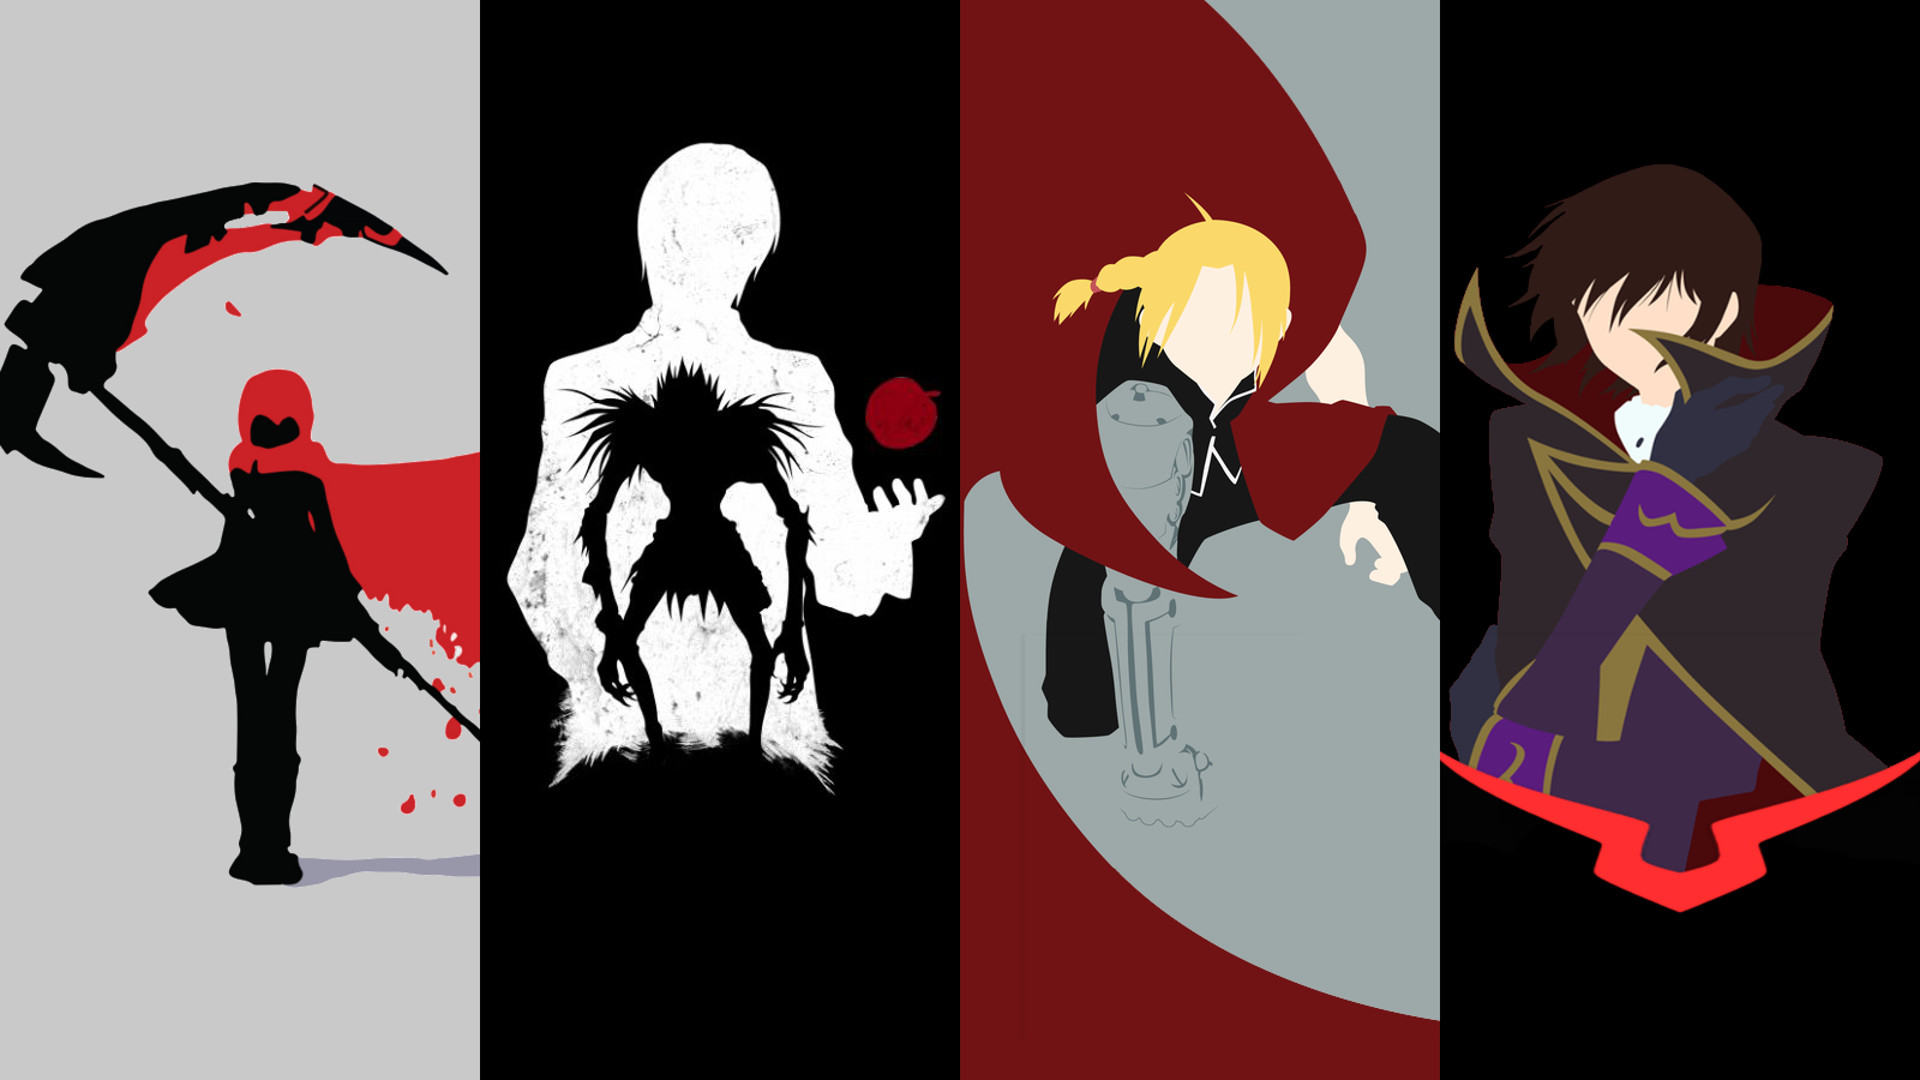 1920x1080 Deathnote FMA Code Geass and RWBY wallpaper () Need #iPhone #6S  #Plus #Wallpaper/ #Background for #IPhone6SPlus? Follow iPhone 6S Plus 3Wa…